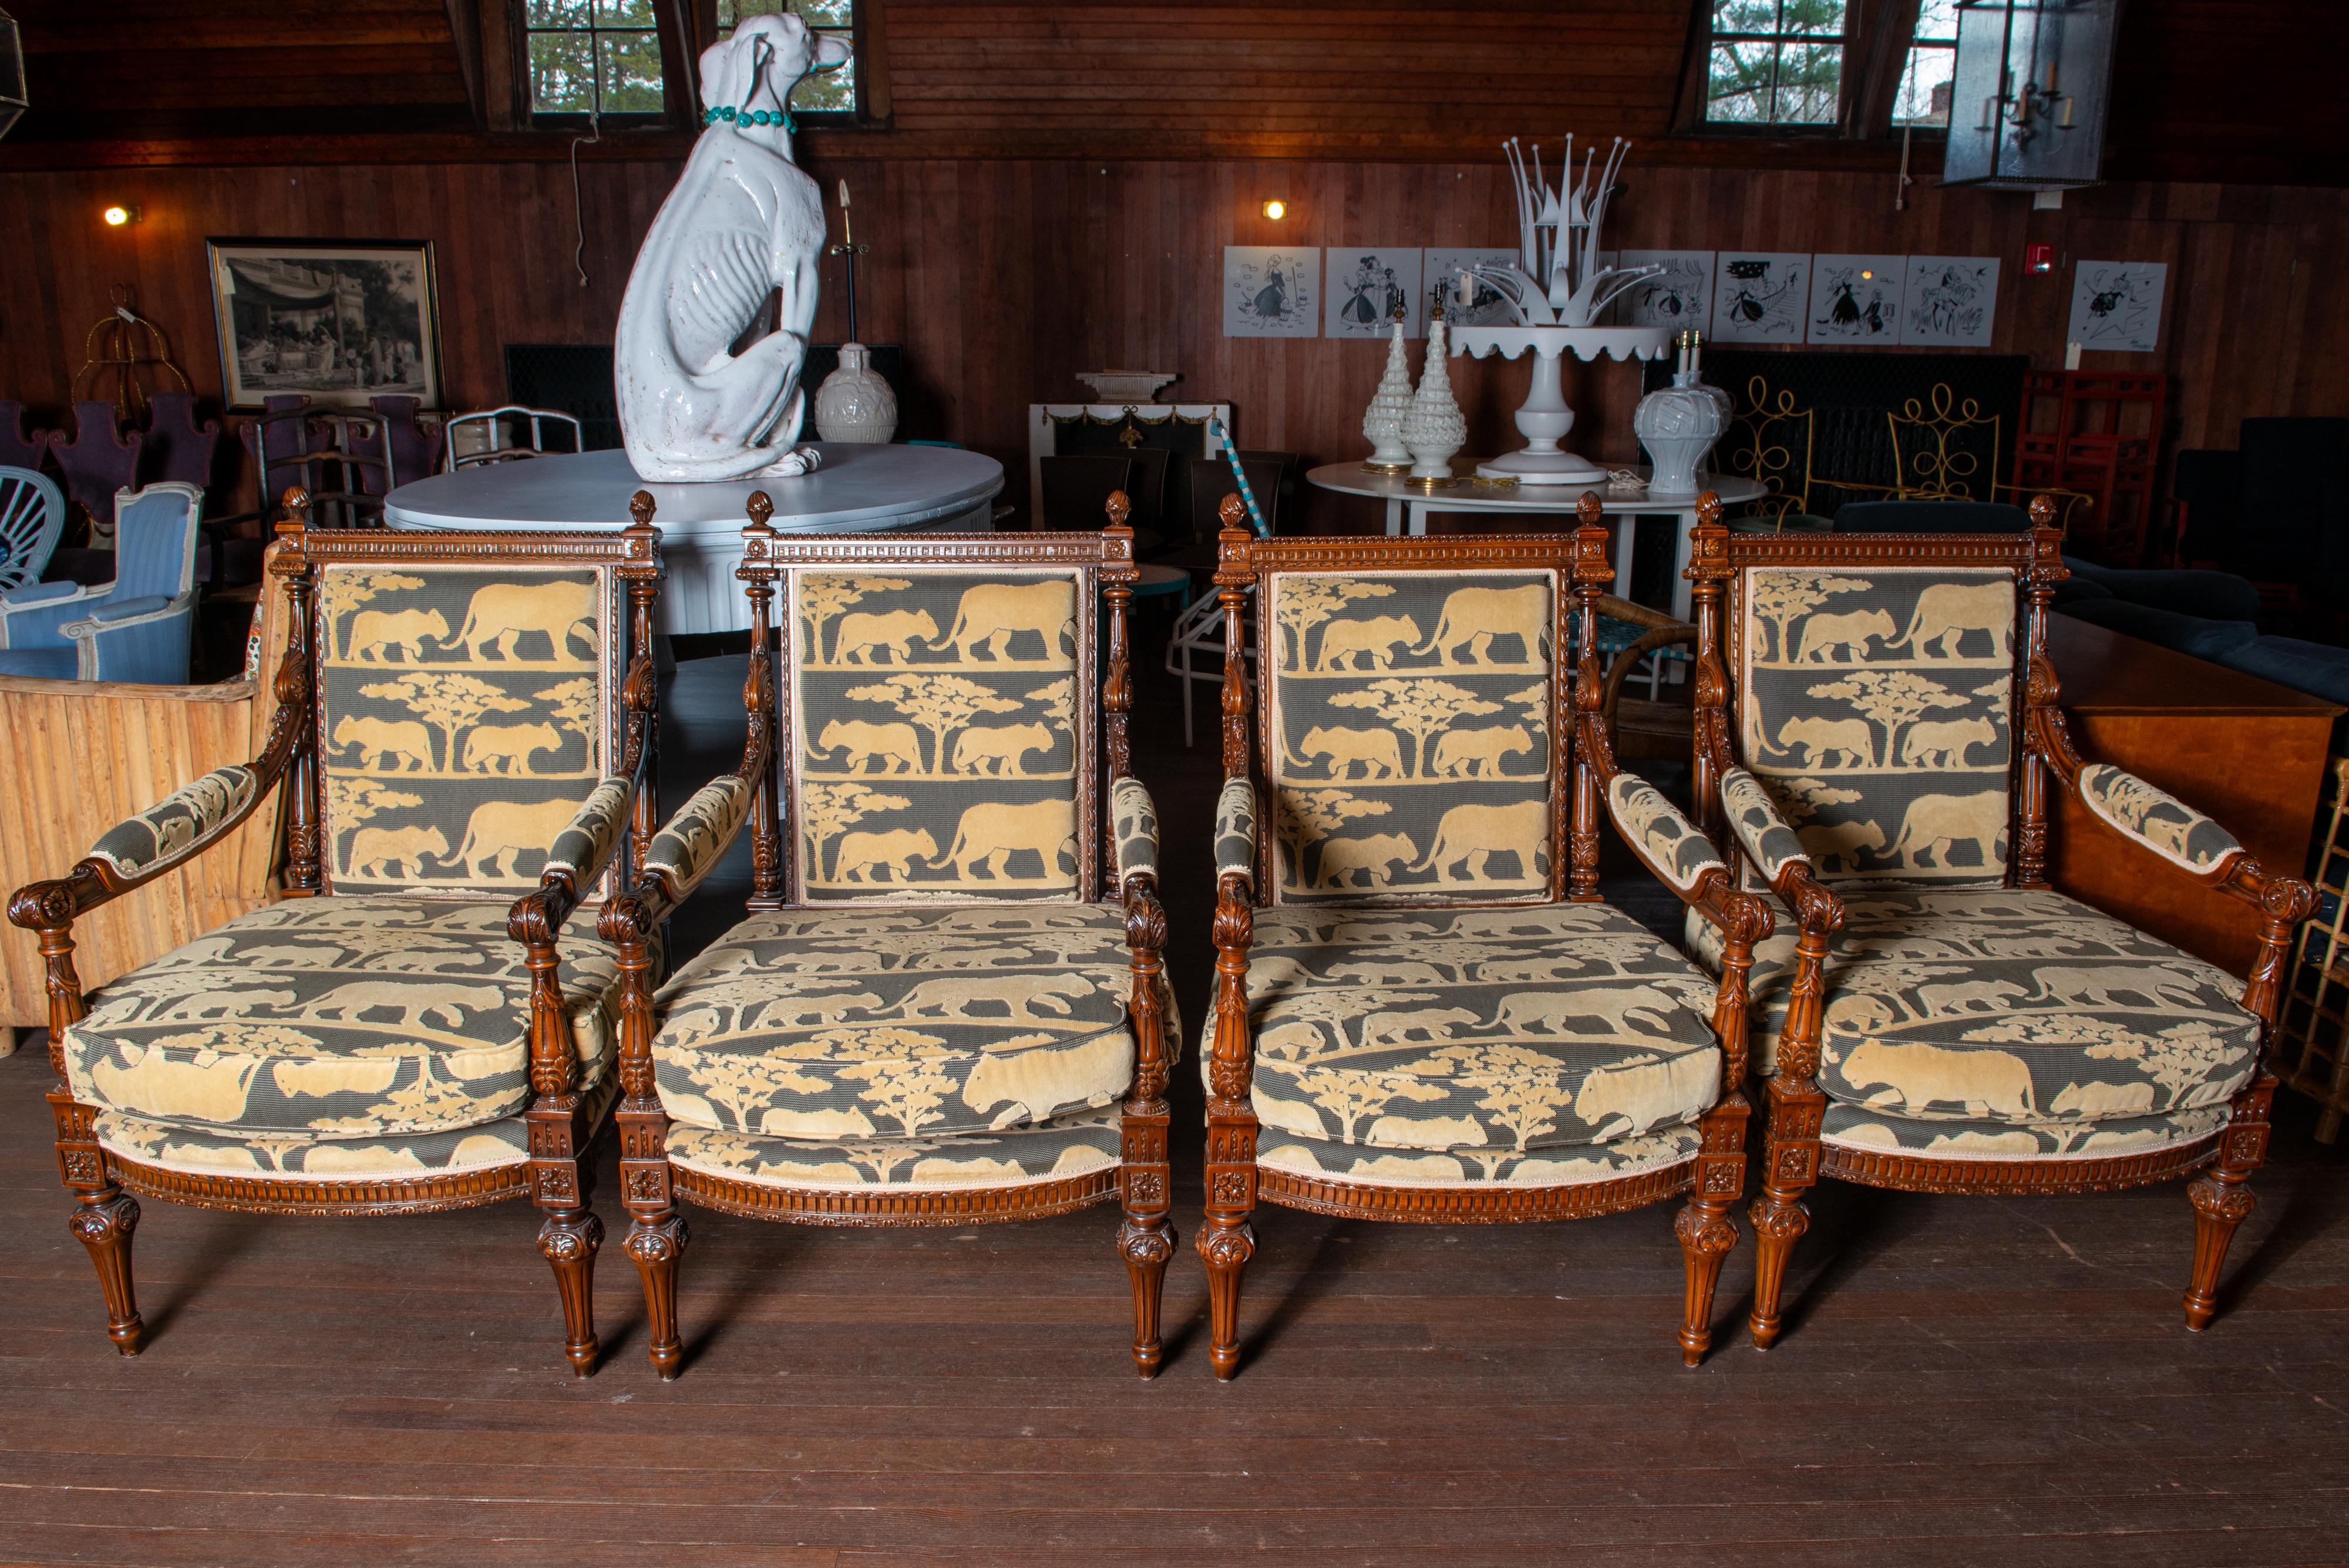 Four French style walnut arm chairs with intricate carved wood details. Upholstered in luxurious velvet fabric depicting silhouetted large cats and umbrella thorn trees on the Serengeti. Chairs sold as a pair. Or buy all four. 